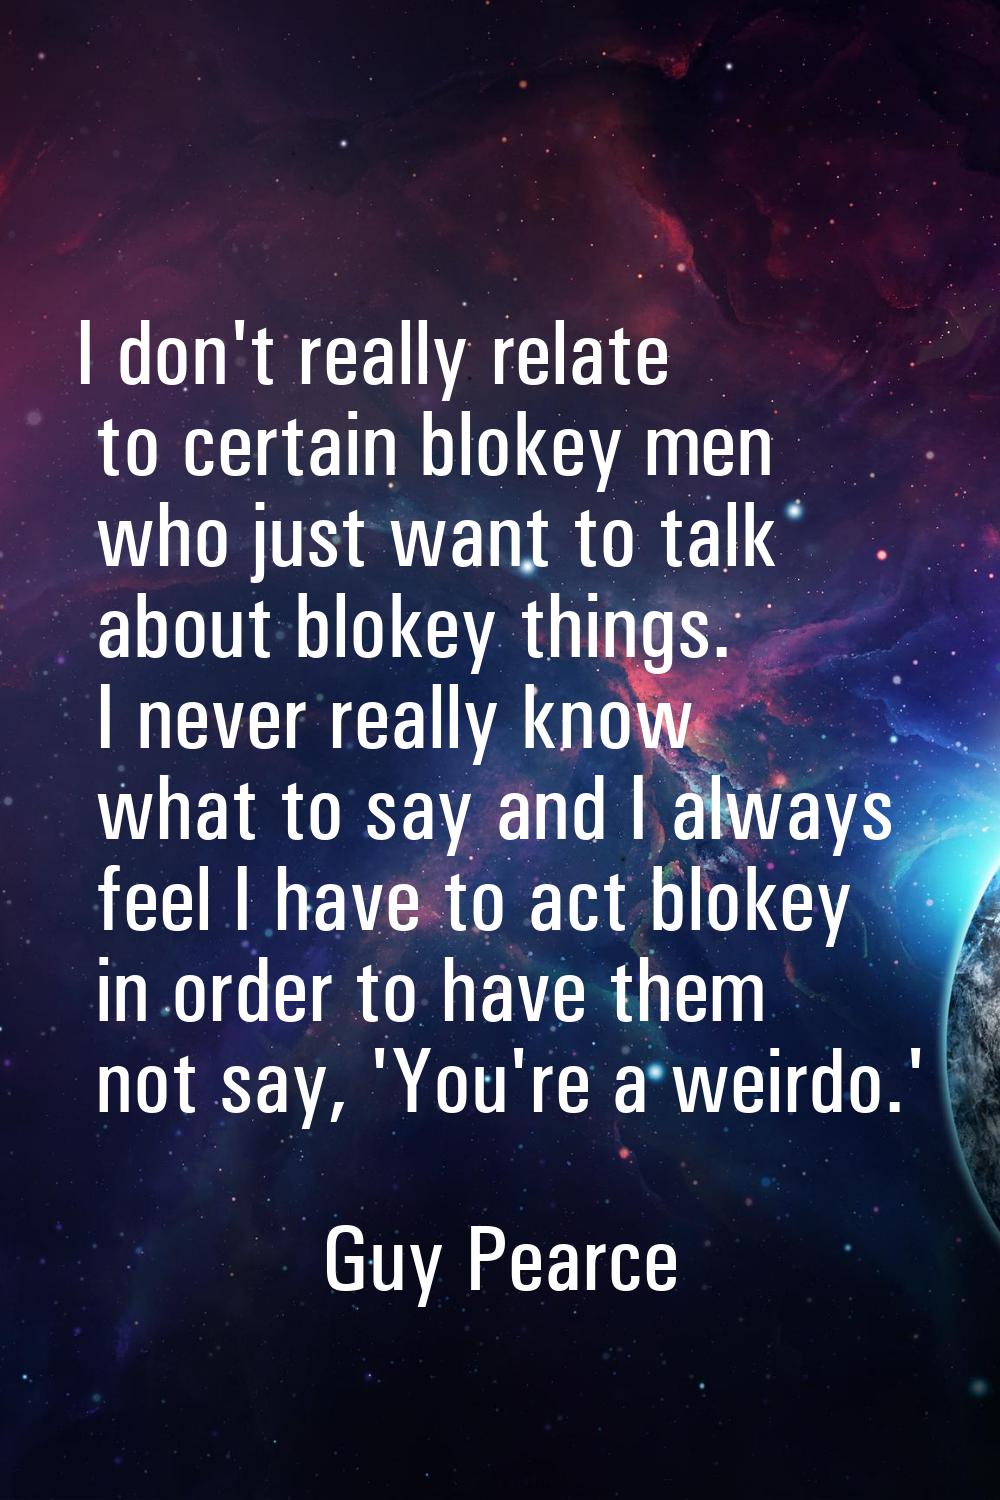 I don't really relate to certain blokey men who just want to talk about blokey things. I never real